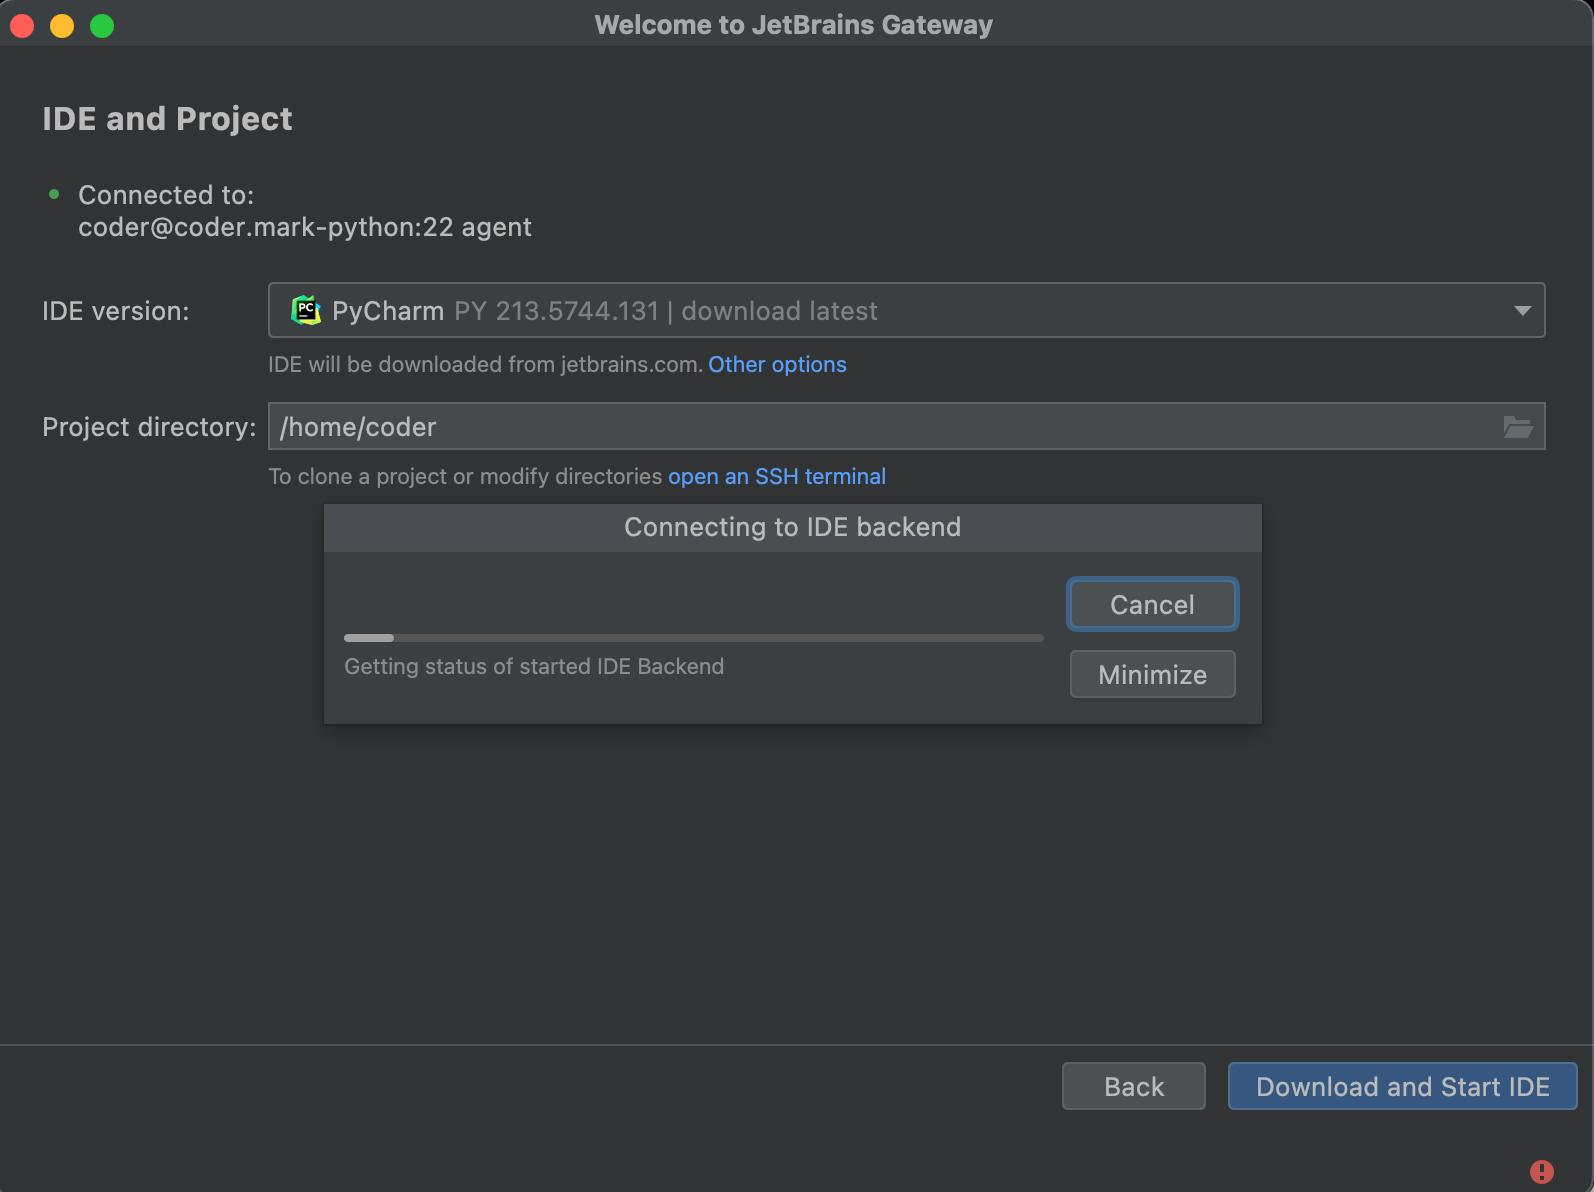 Select JetBrains IDE and working directory